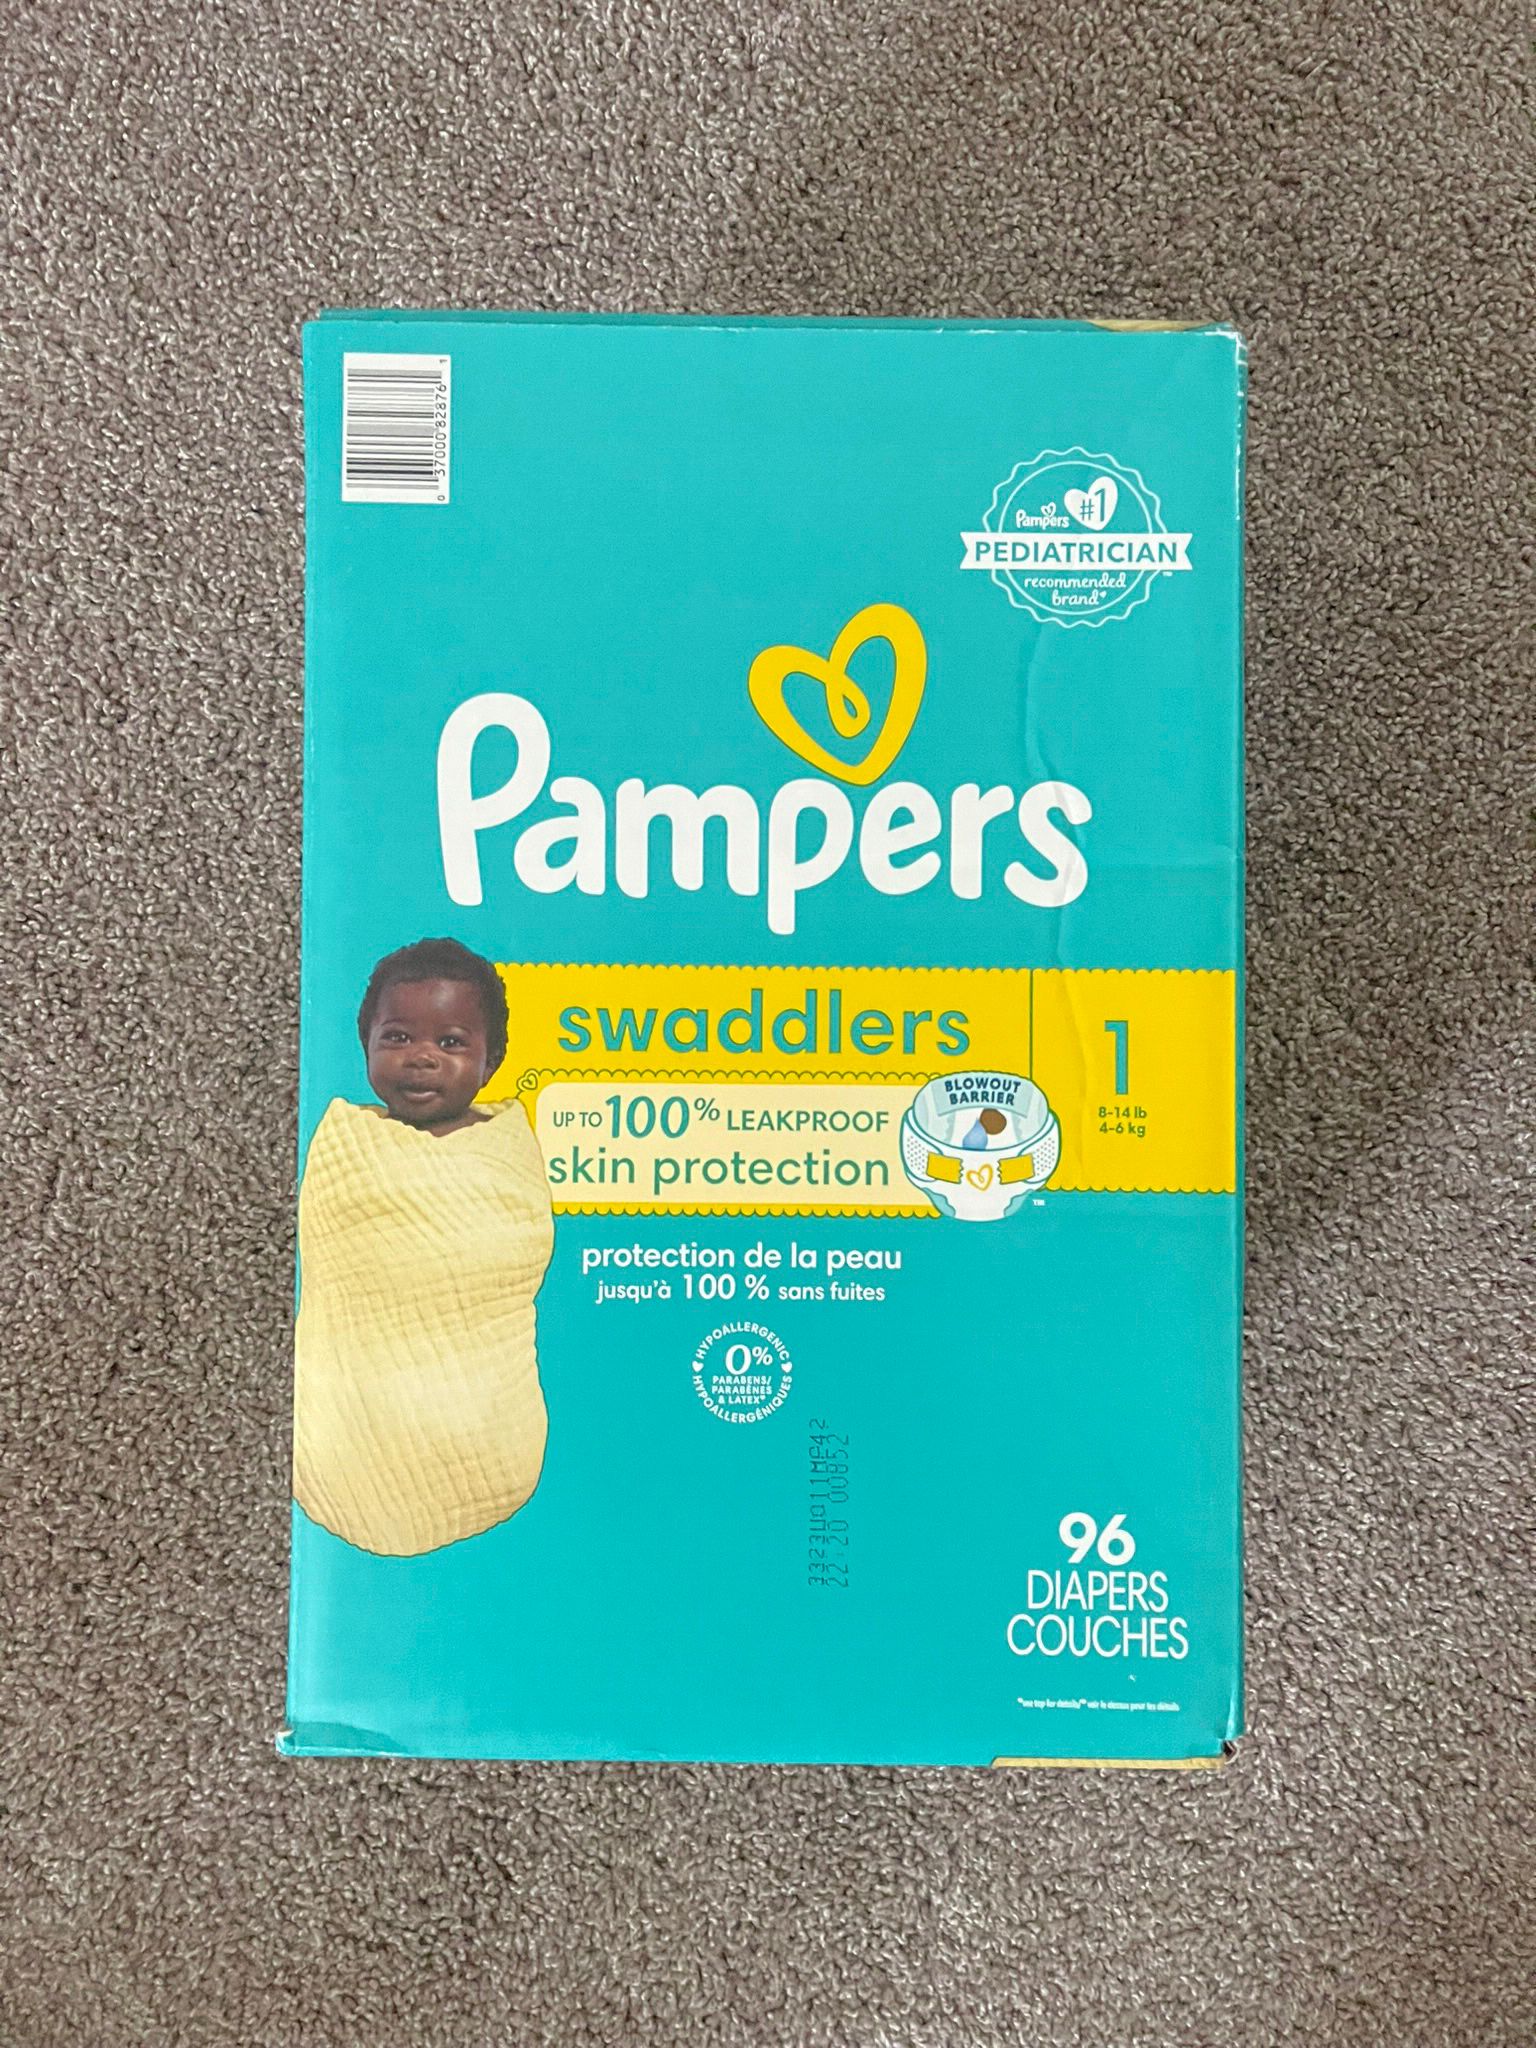 Pampers Swaddlers Diapers, Size 1, 96 Count